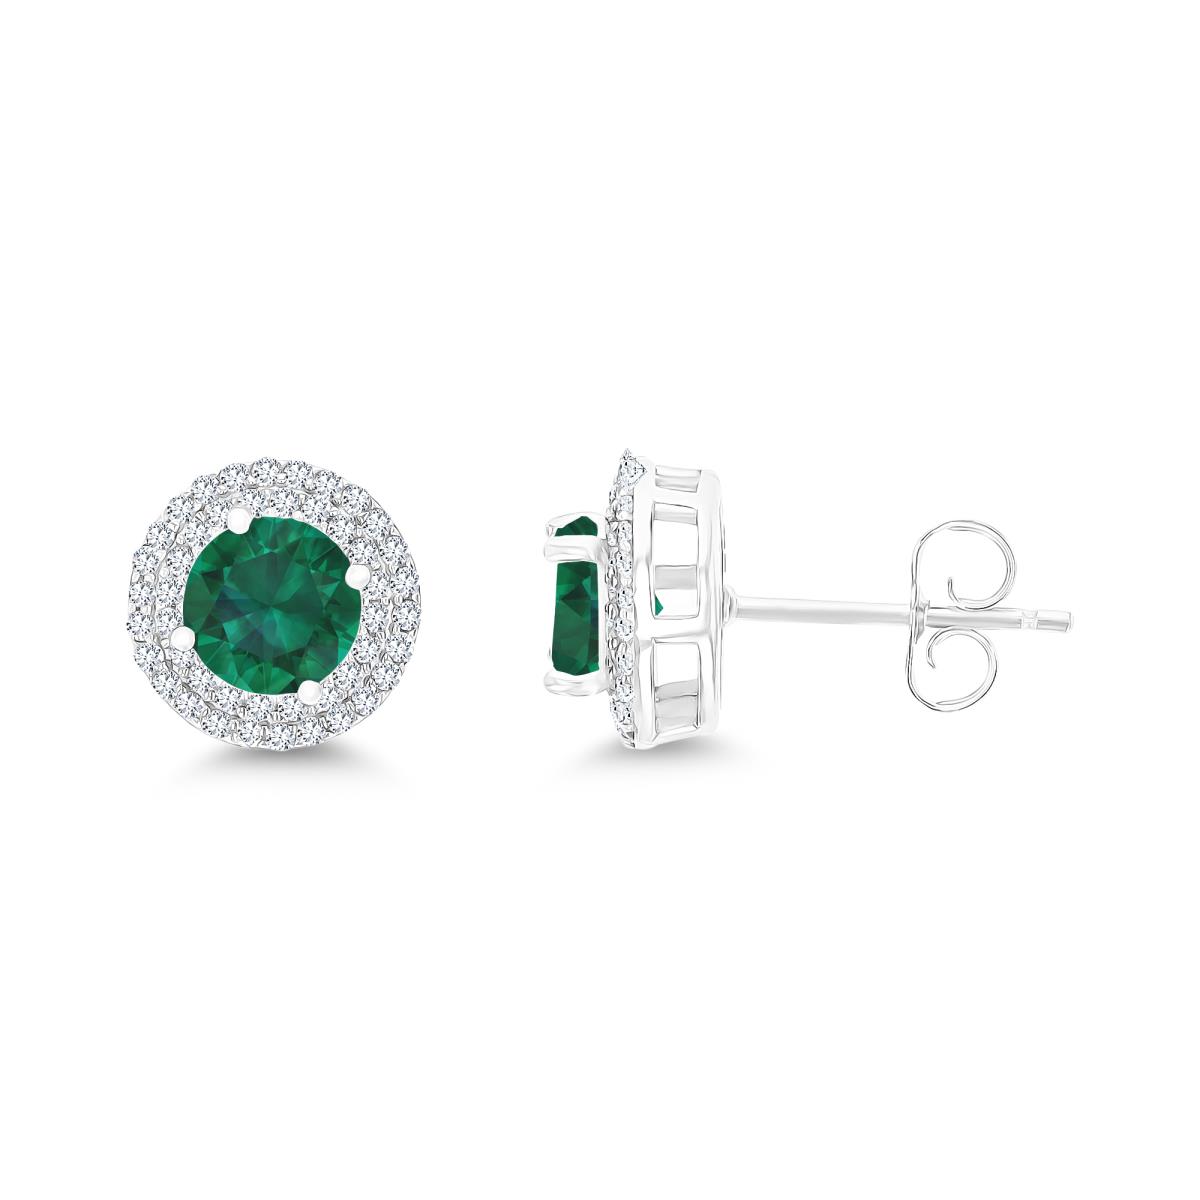 Sterling Silver Rhodium 6mm RD Cr Emerald / Cr White Sapphire Double Halo Stud Earring